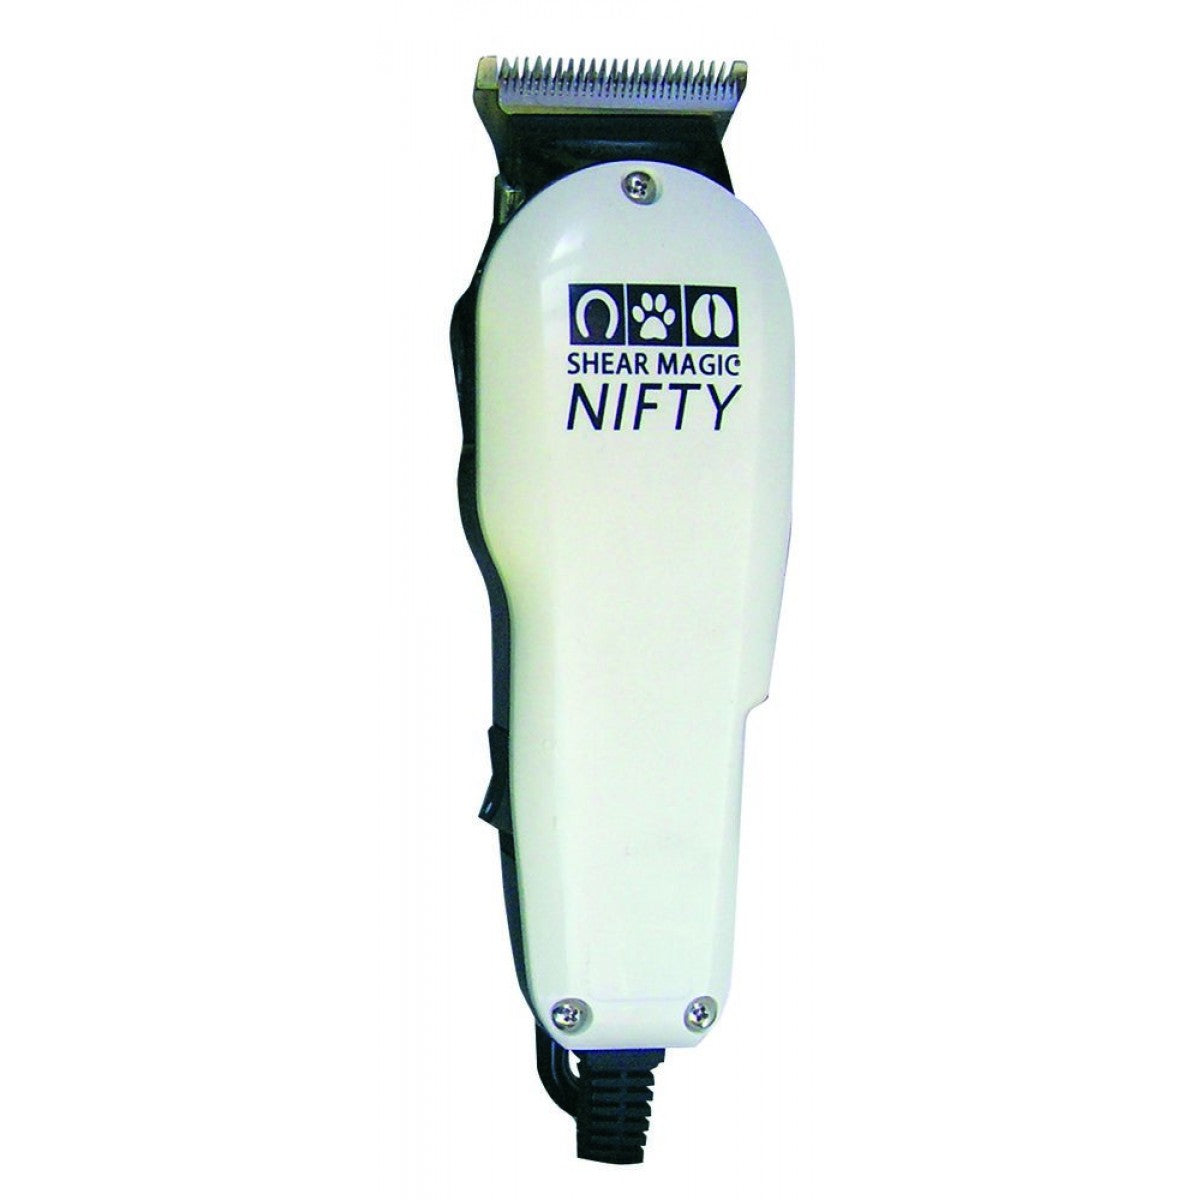 Shear Magic Nifty 2000 Clipper with Adjustable Blade